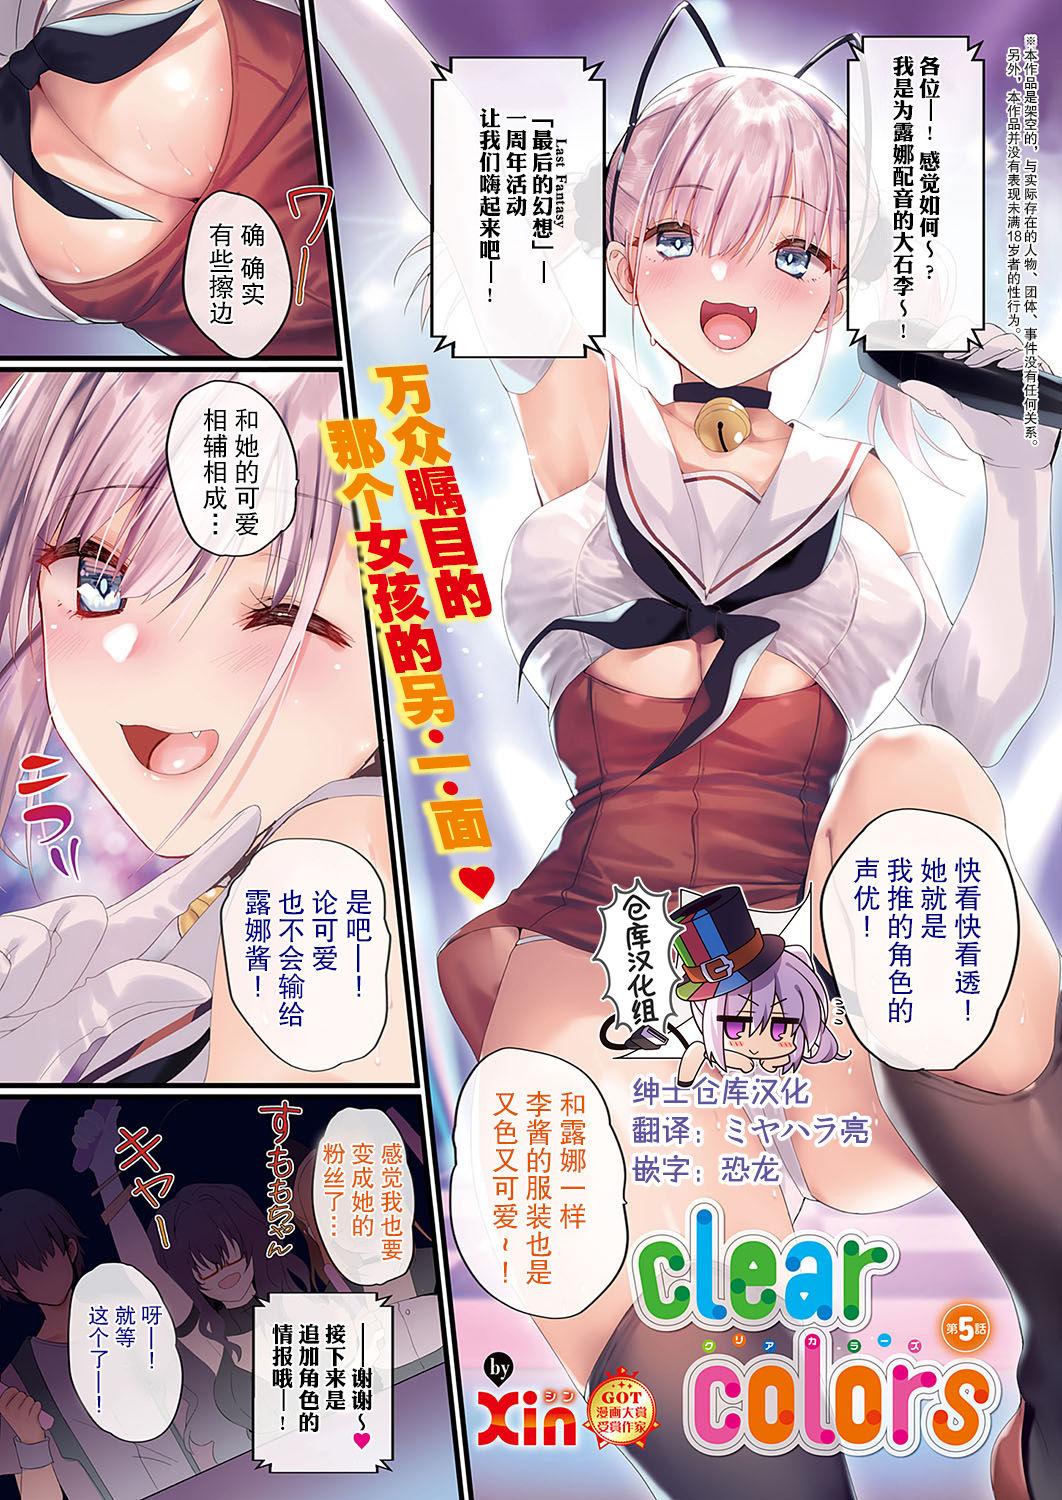 clear colors Ch. 5 1